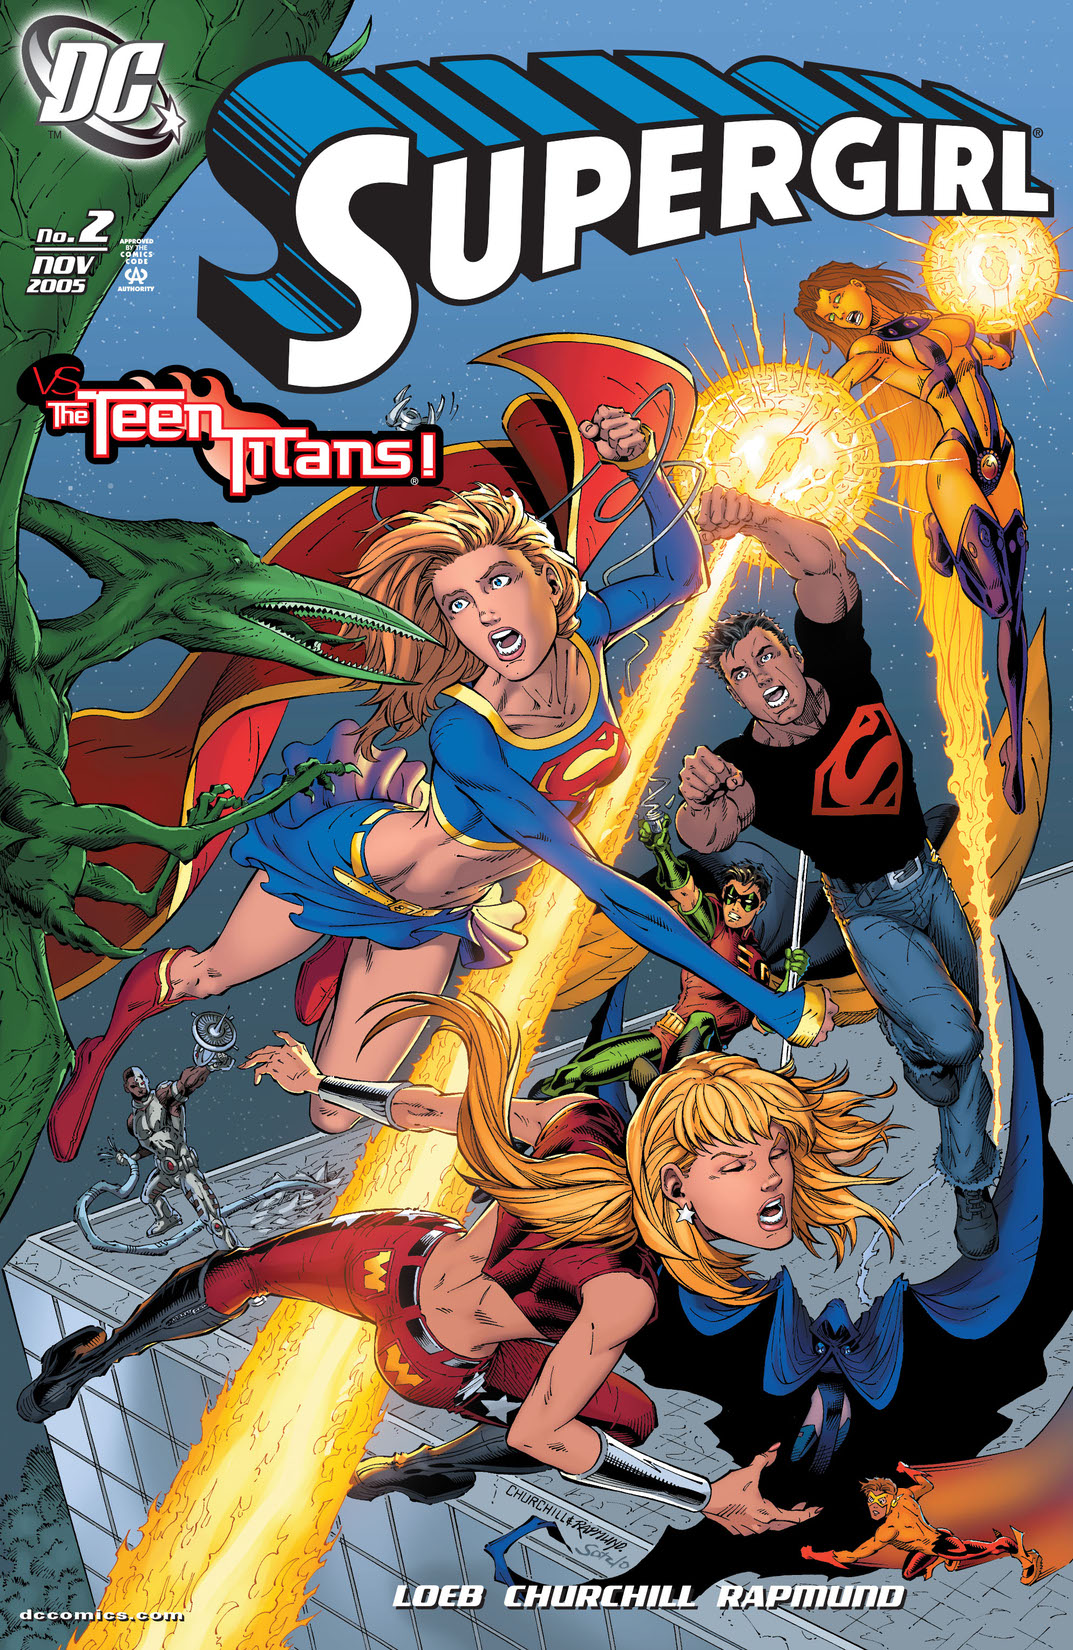 Supergirl (2005-) #2 preview images